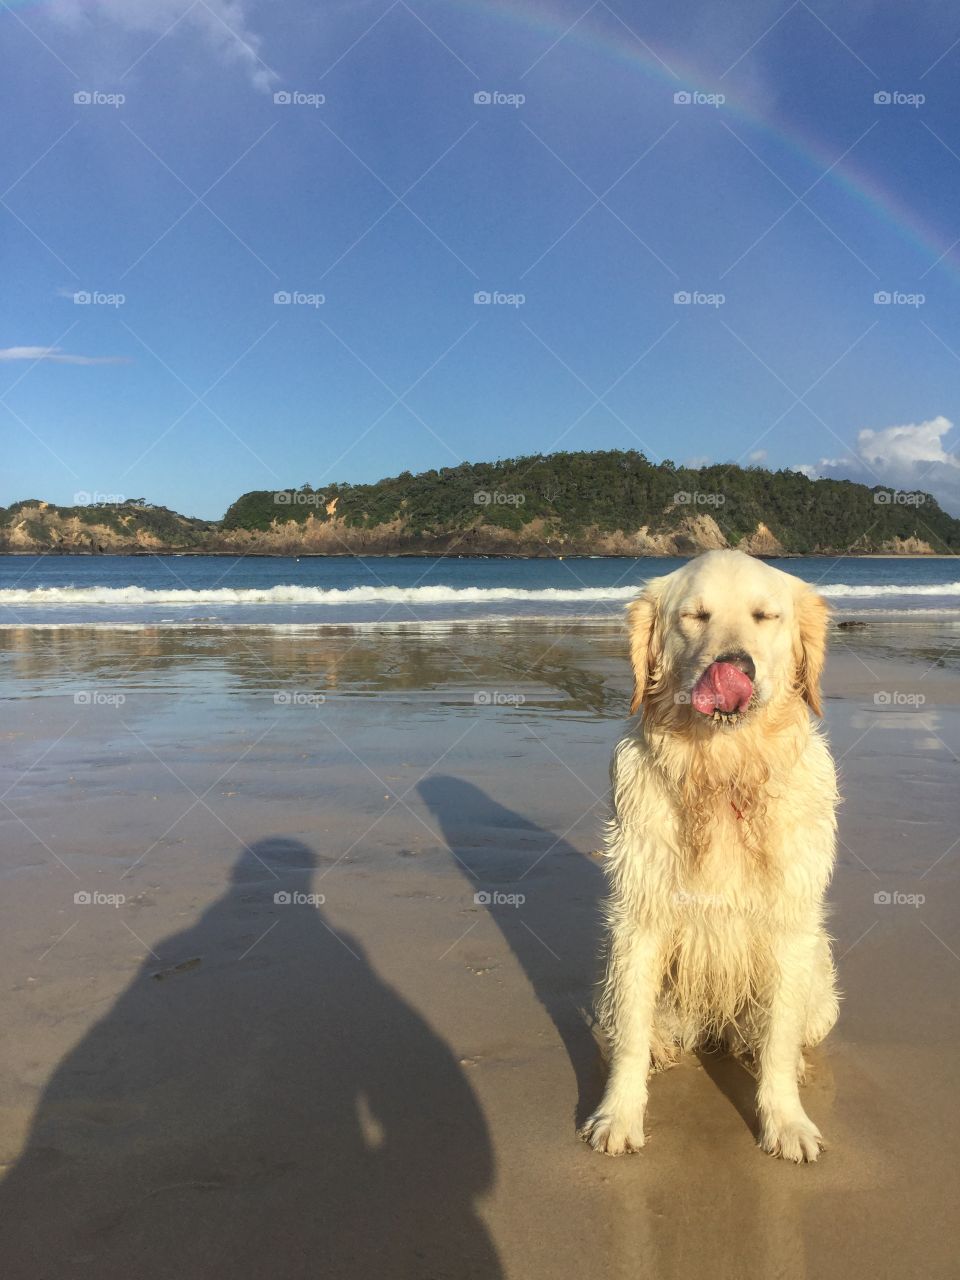 A perfectly timed photo of my dog licking her nose at our local beach. Took this photo at around 5:20 (sorry about the shadows)